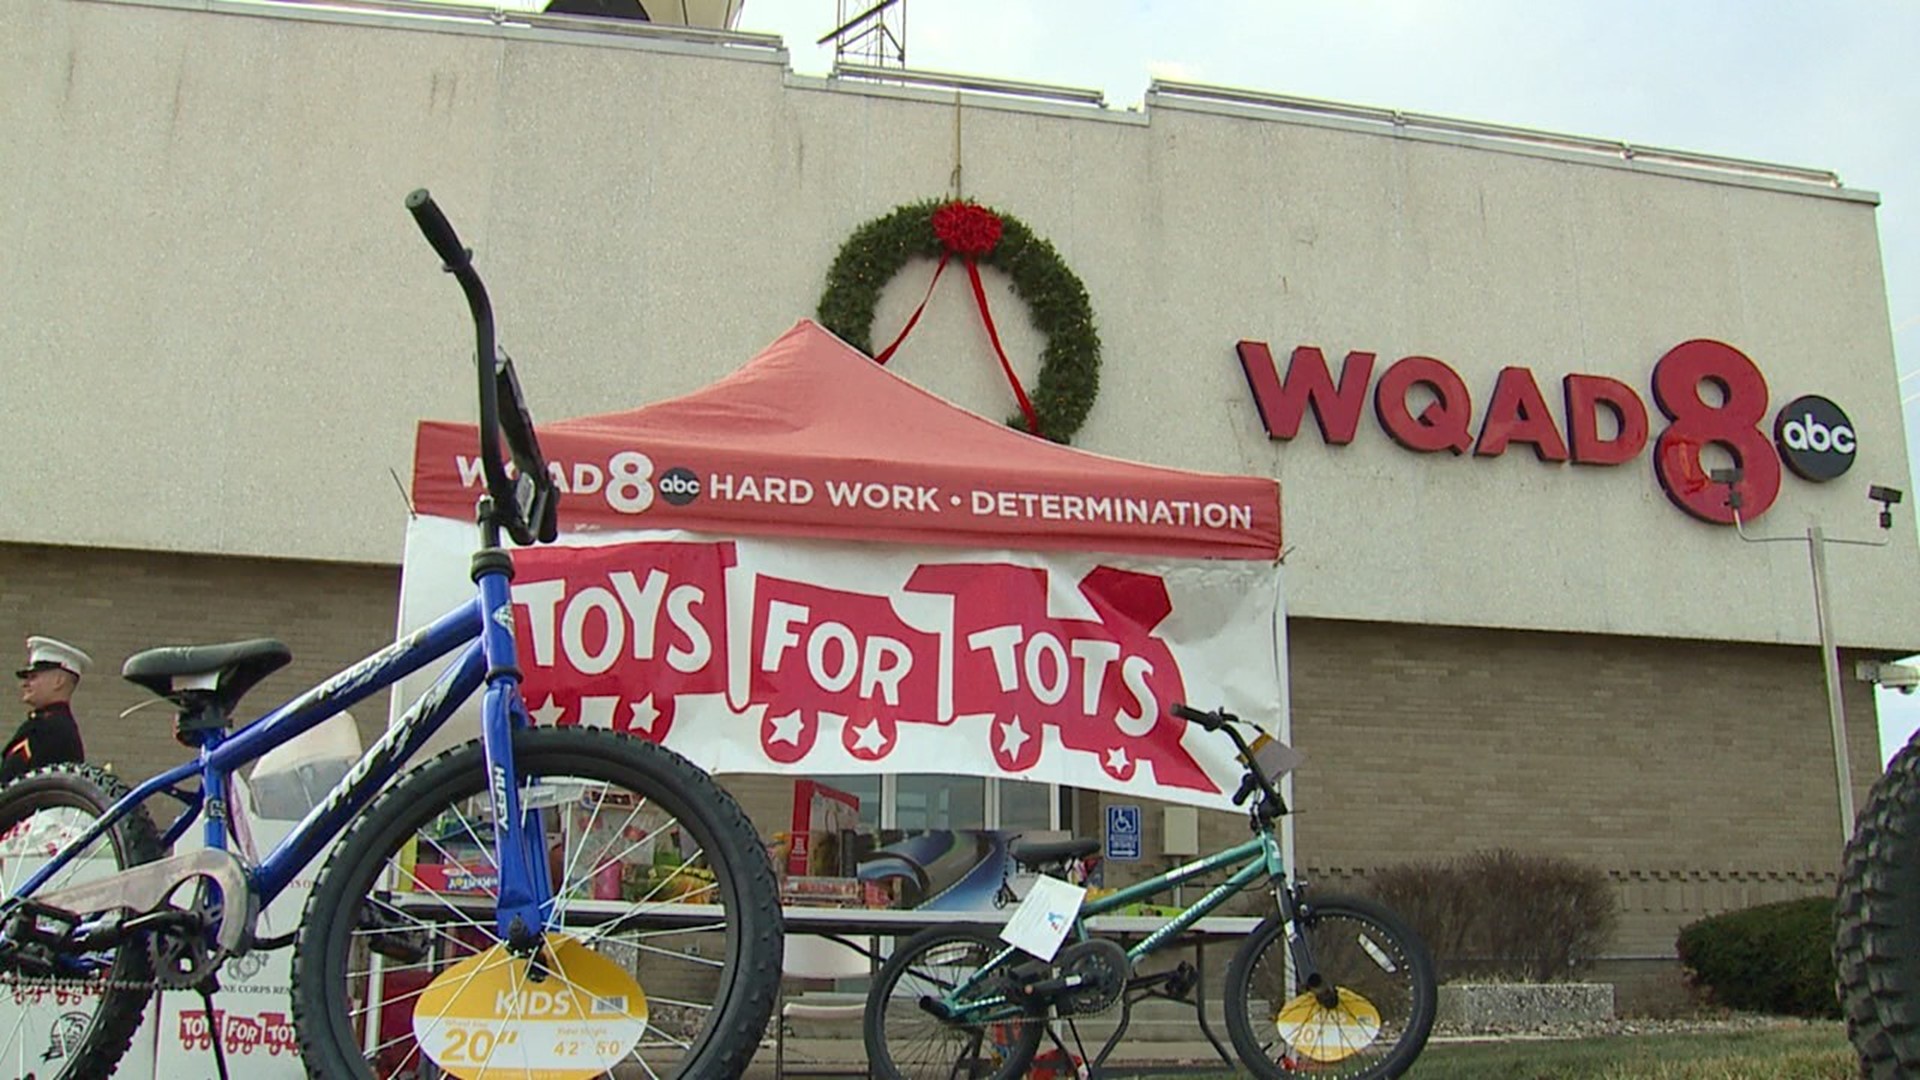 WQAD hosted a donation drive Tuesday, Nov. 29 in partnership with the U.S. Marine Corps Reserve Toys for Tots Program.